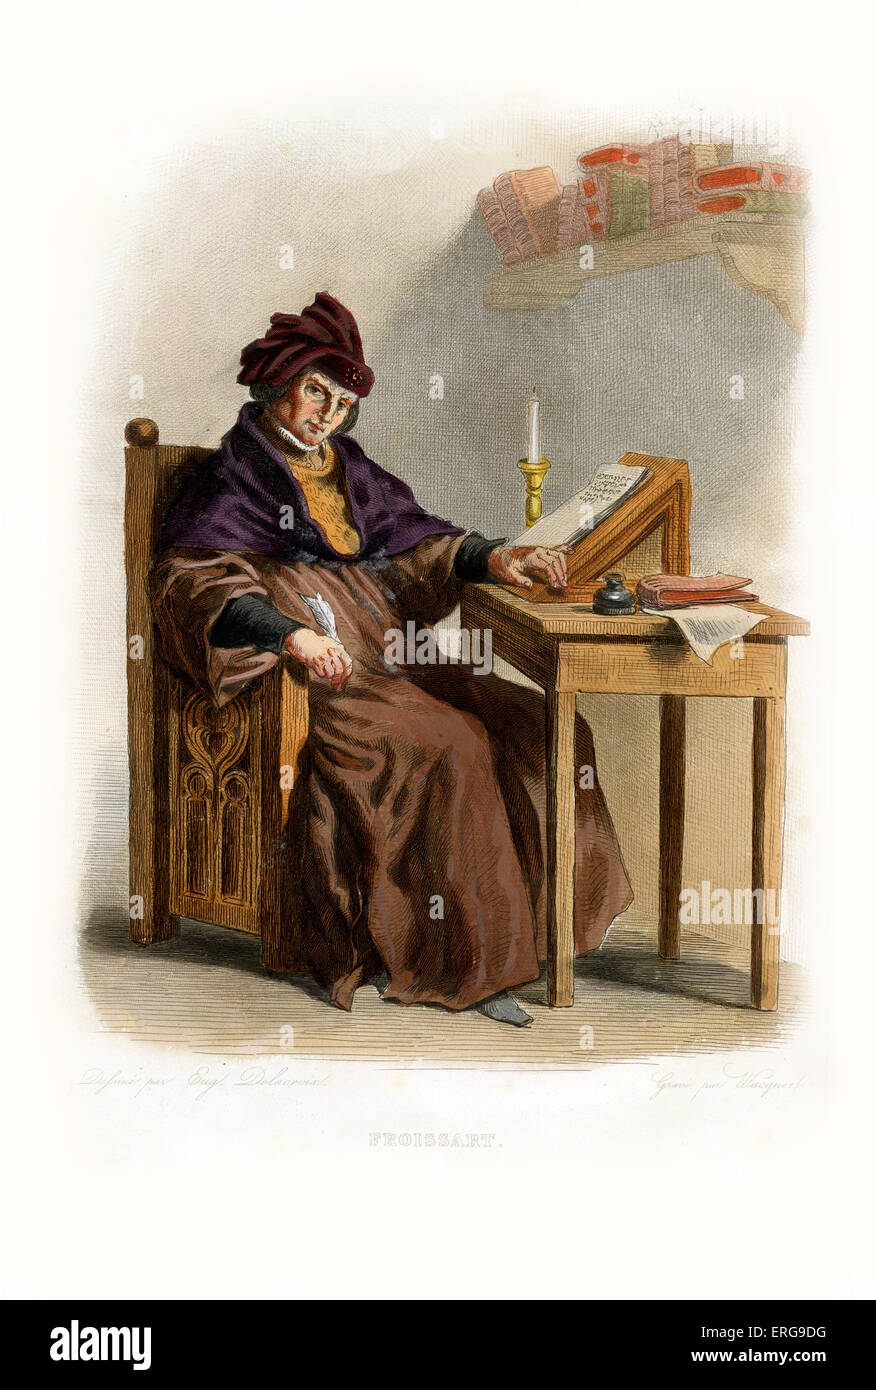 Jean Froissart (often referred to in English as John Froissart).One of the most important chroniclers of medieval France. Stock Photo